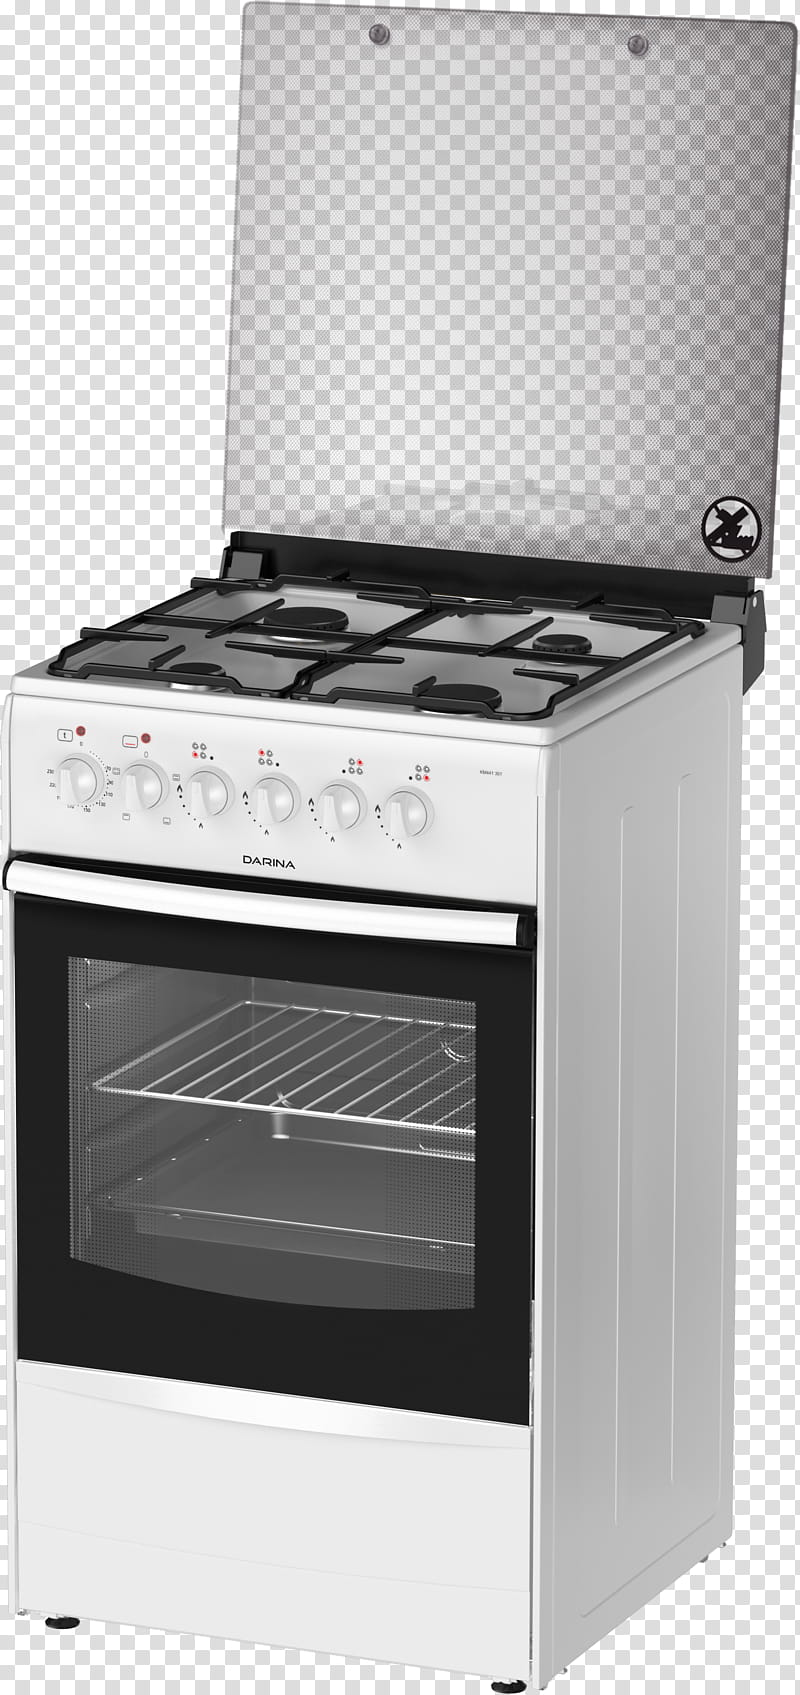 Home, Gas Stove, Cooking Ranges, Electric Stove, Hob, White, Darina, Tableware transparent background PNG clipart